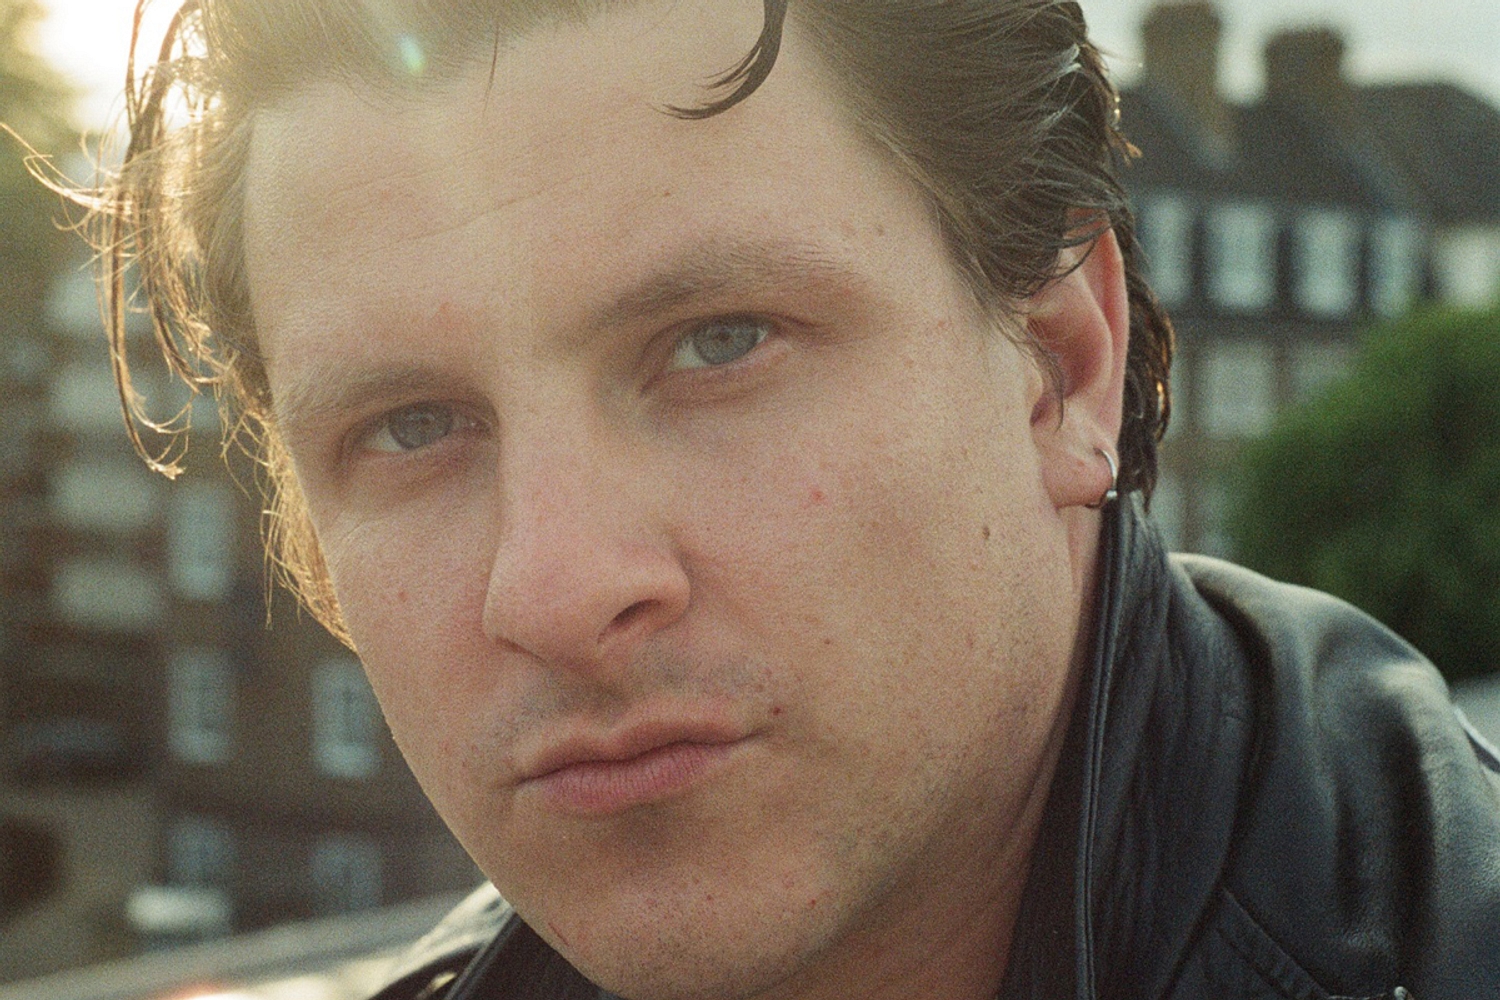 Watch Jamie T cover Meghan Trainor’s ‘All About That Bass’ for Radio 1